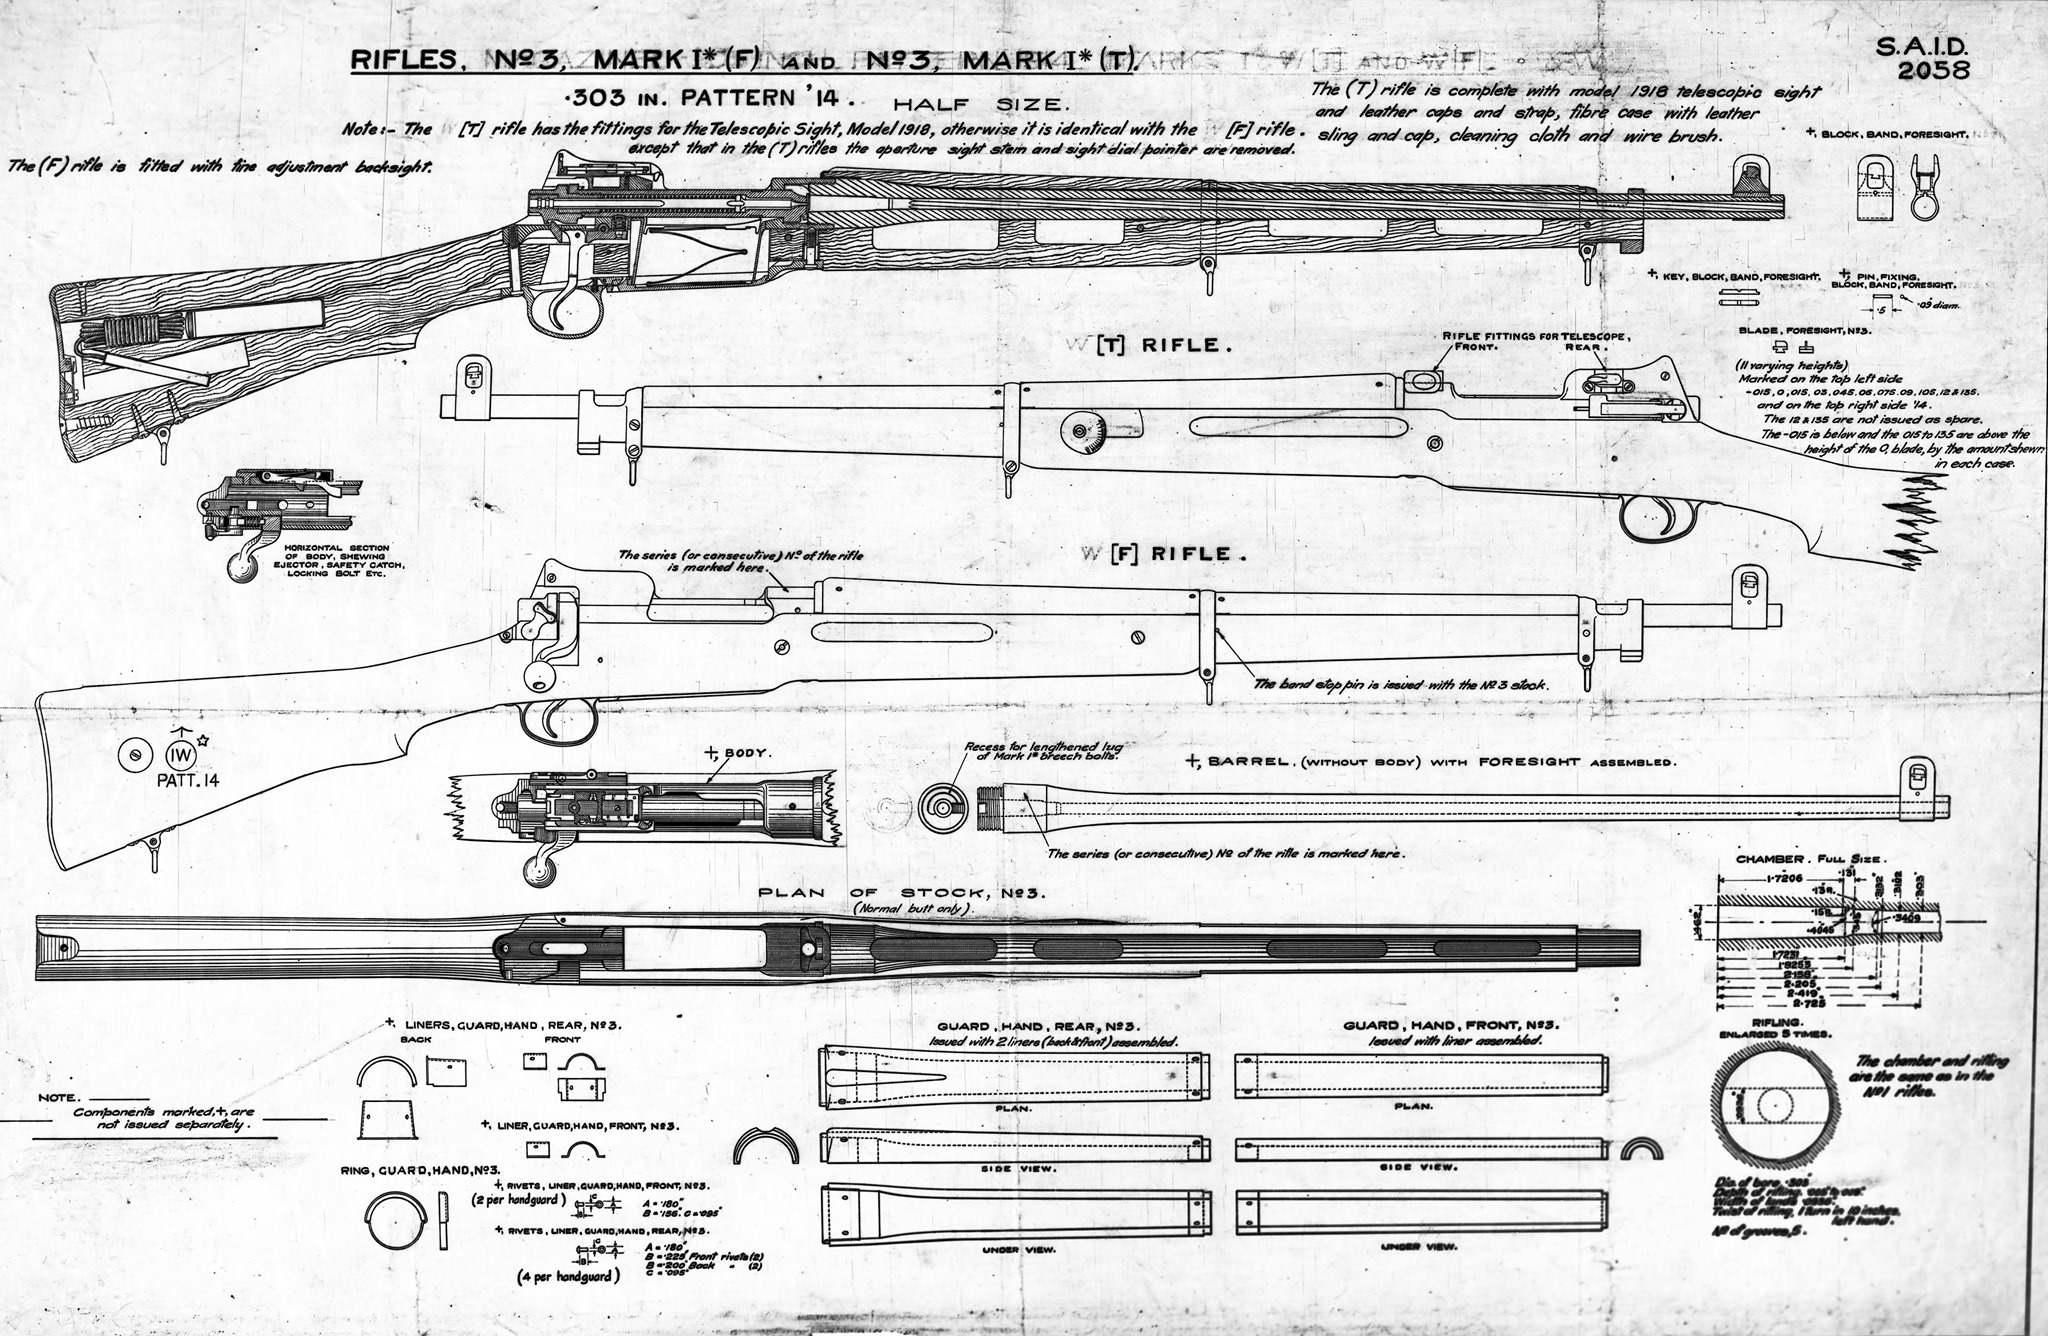 P14 was renamed the ‘Rifle, No.3’ in 1926 Enfield Royal Armouries ...